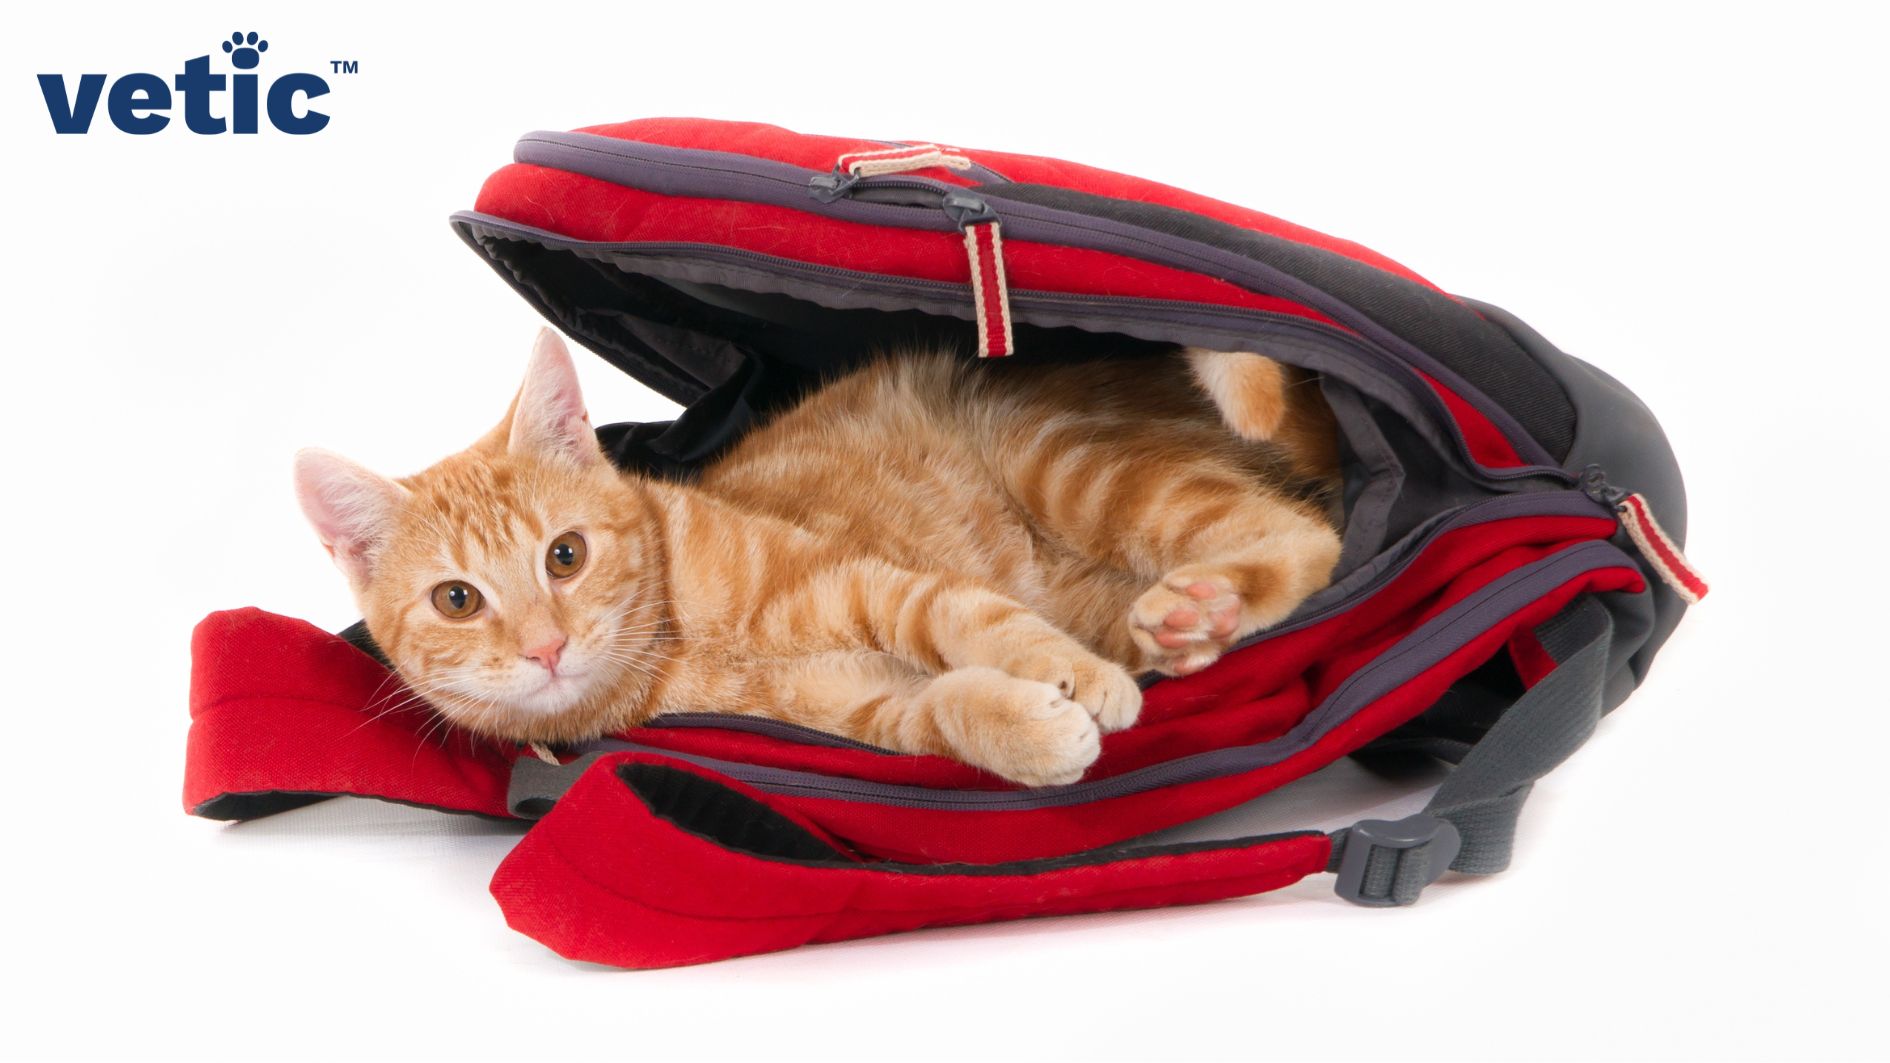 A ginger cat lying inside an unzipped red and grey cat bag looking at the camera.